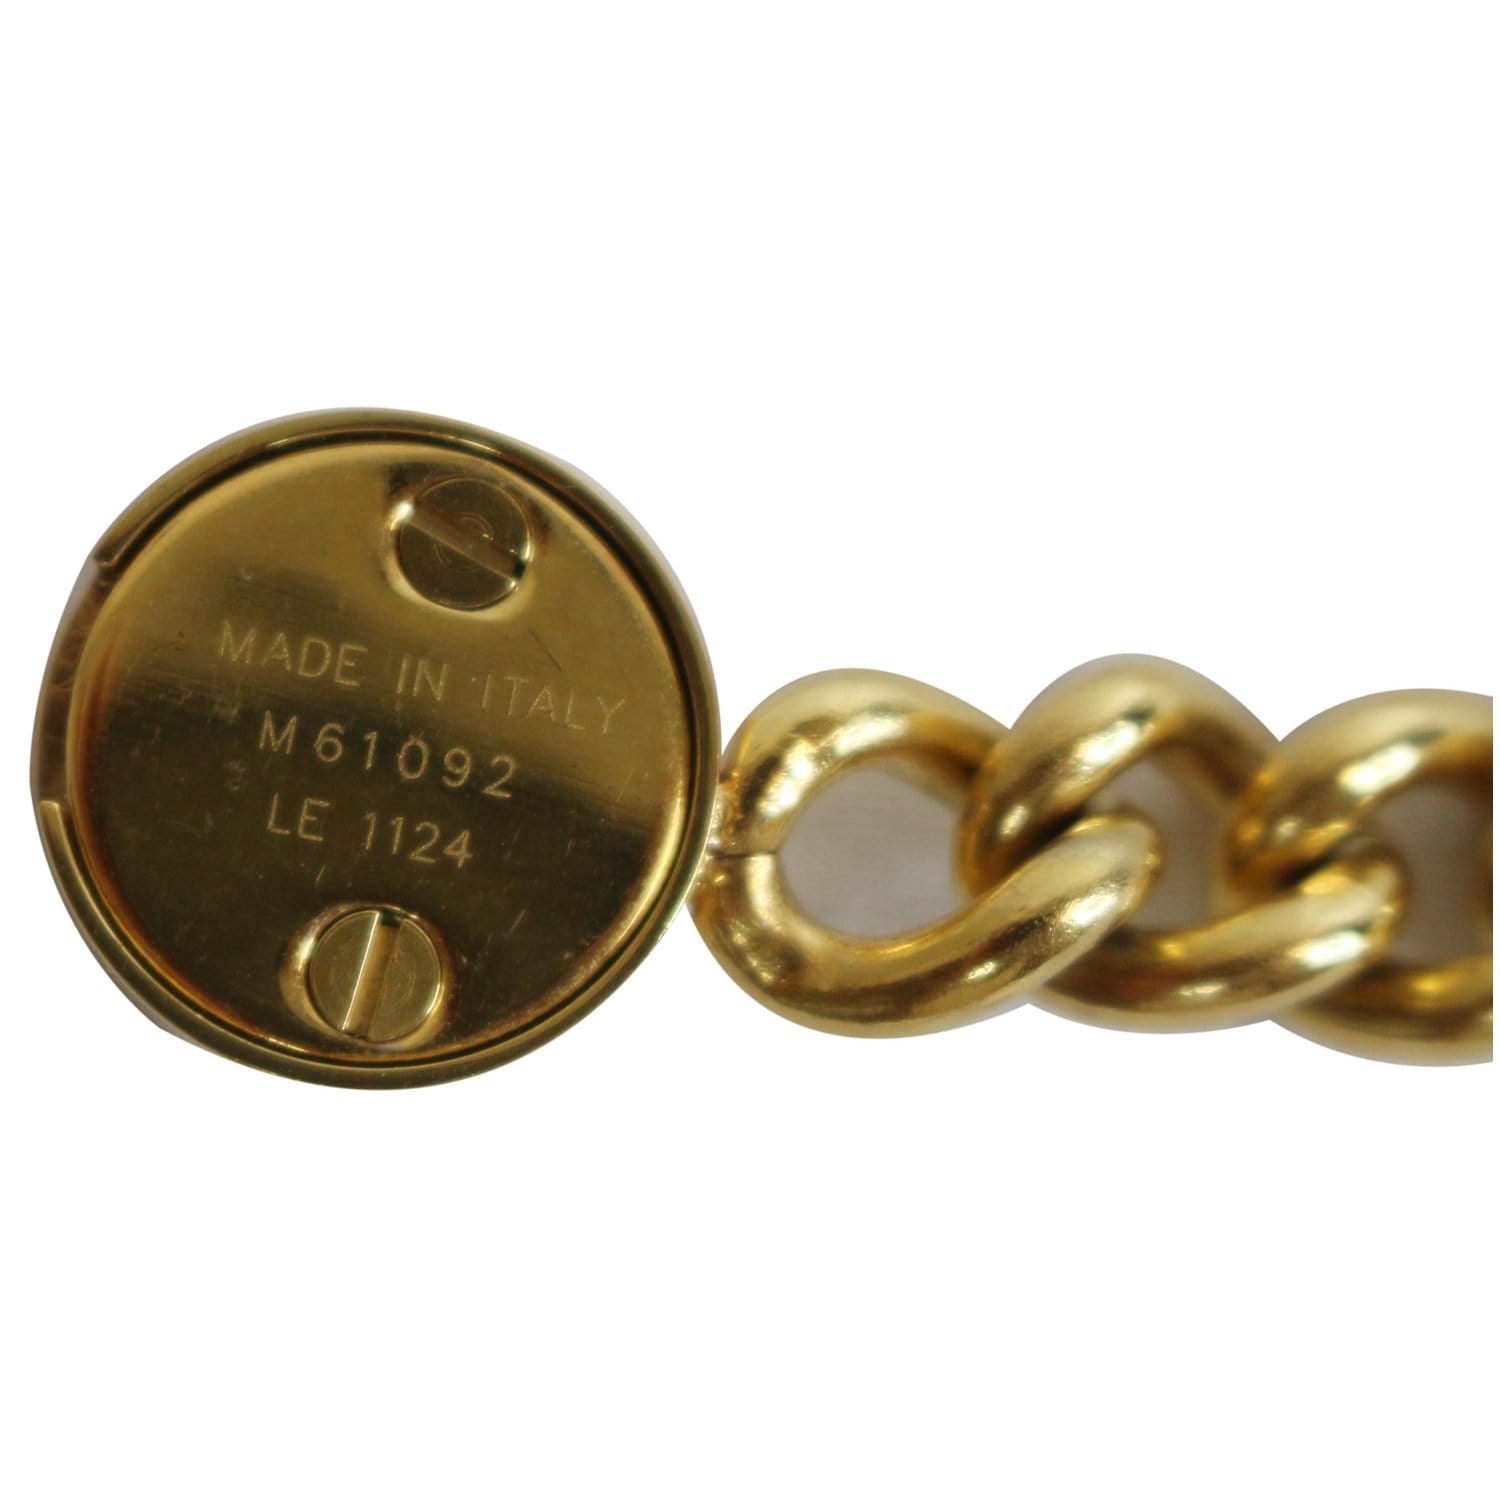 Bracelet Louis Vuitton Gold in Other - 33969367